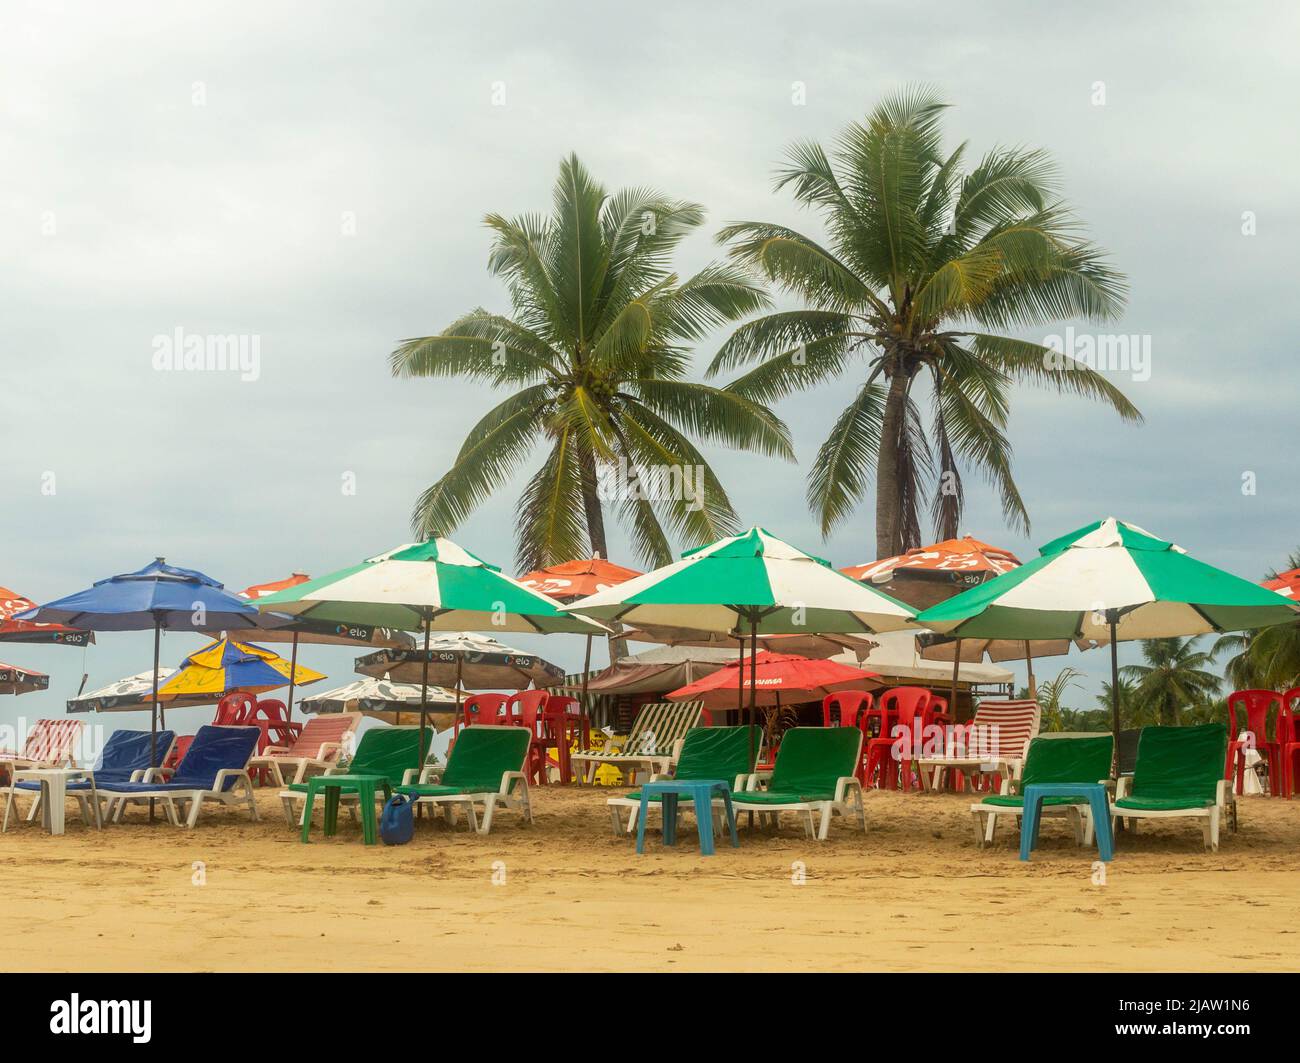 Lansdcape of a beach with umbrellas and deckchairs Stock Photo